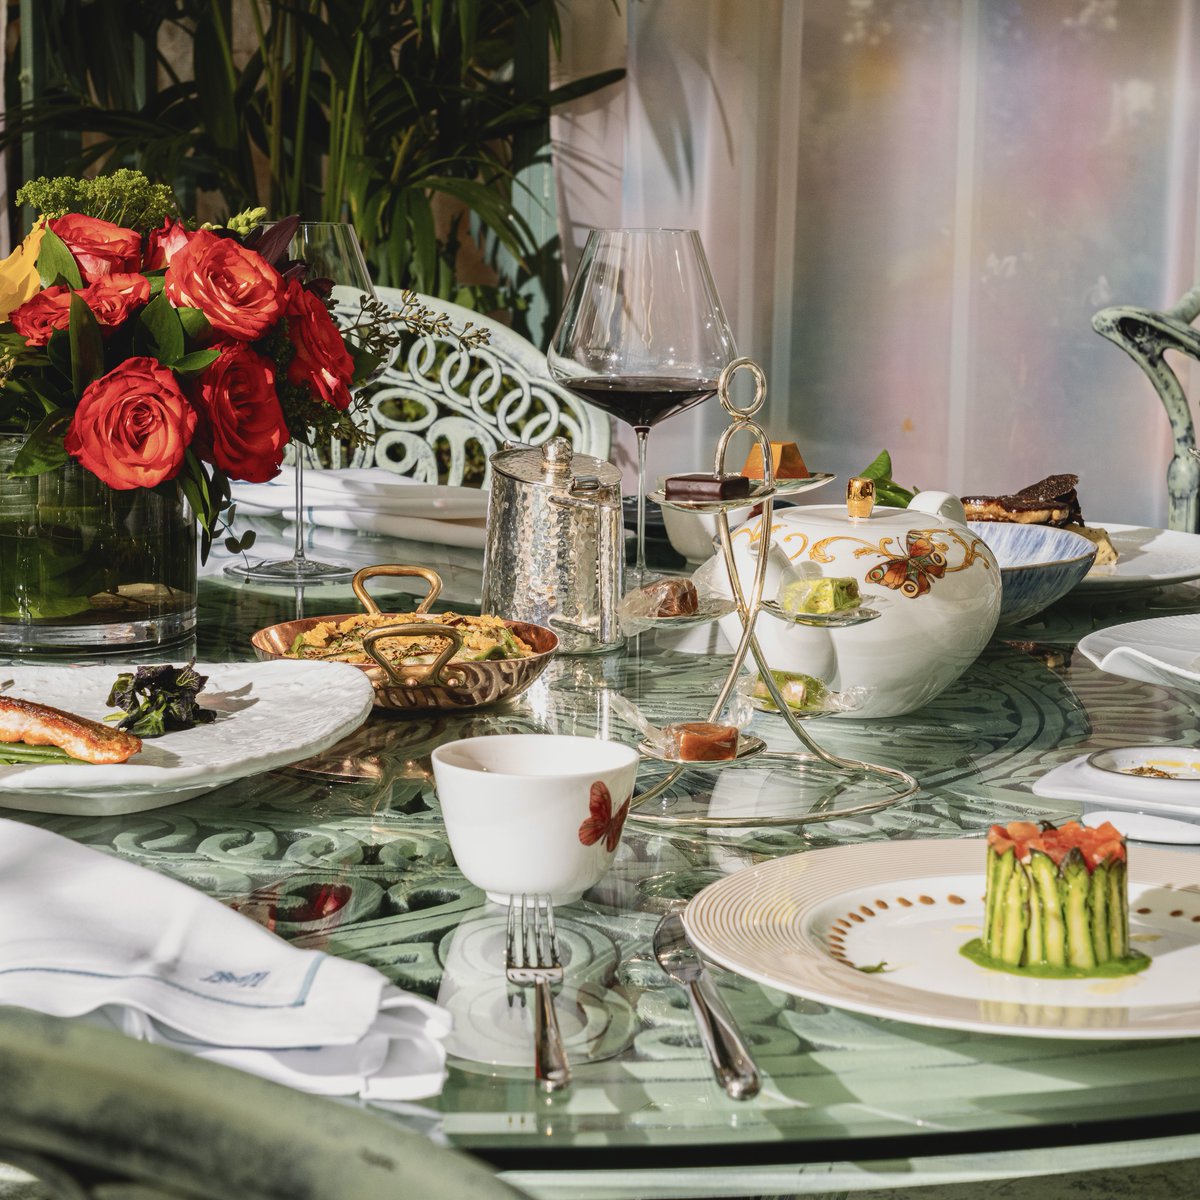 Lost in the lush embrace of our Conservatory, an enchanting gazebo is yet to be discovered. Nestled inside you'll find The Garden Table, home to brunch by Sadelle's, afternoon tea by Petrossian, and dinner by MICHAEL MINA. #ThisIsTheLife Reserve at spr.ly/6016kL7Hs.